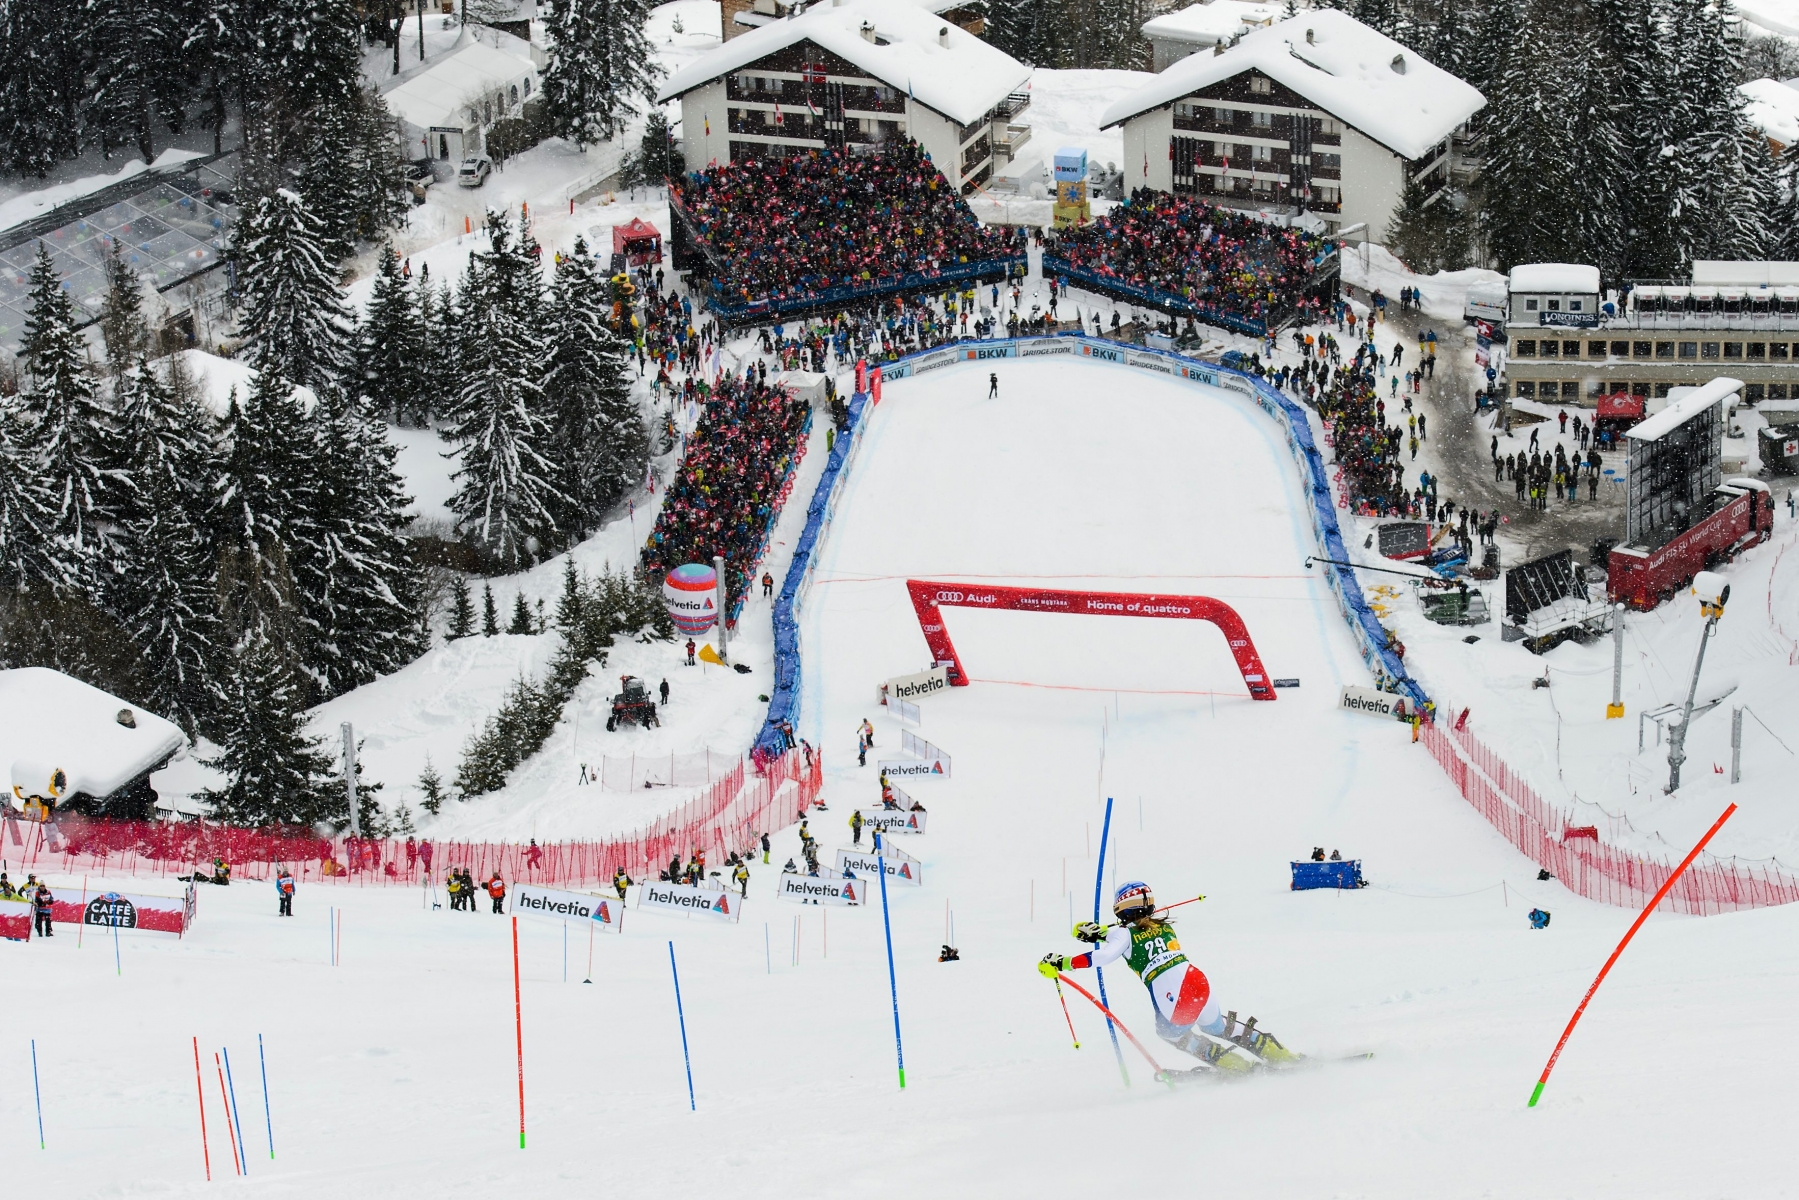 Charlotte Chable of Switzerland in action during the second run of the women's Slalom race of the FIS Alpine Ski World Cup season in Crans-Montana, Switzerland, Monday, February 15, 2016. (KEYSTONE/Jean-Christophe Bott)ski SKI ALPIN WELTCUP 2015/16 CRANS-MONTANA SKI ALPIN WELTCUP 2015/16 CRANS-MONTANA